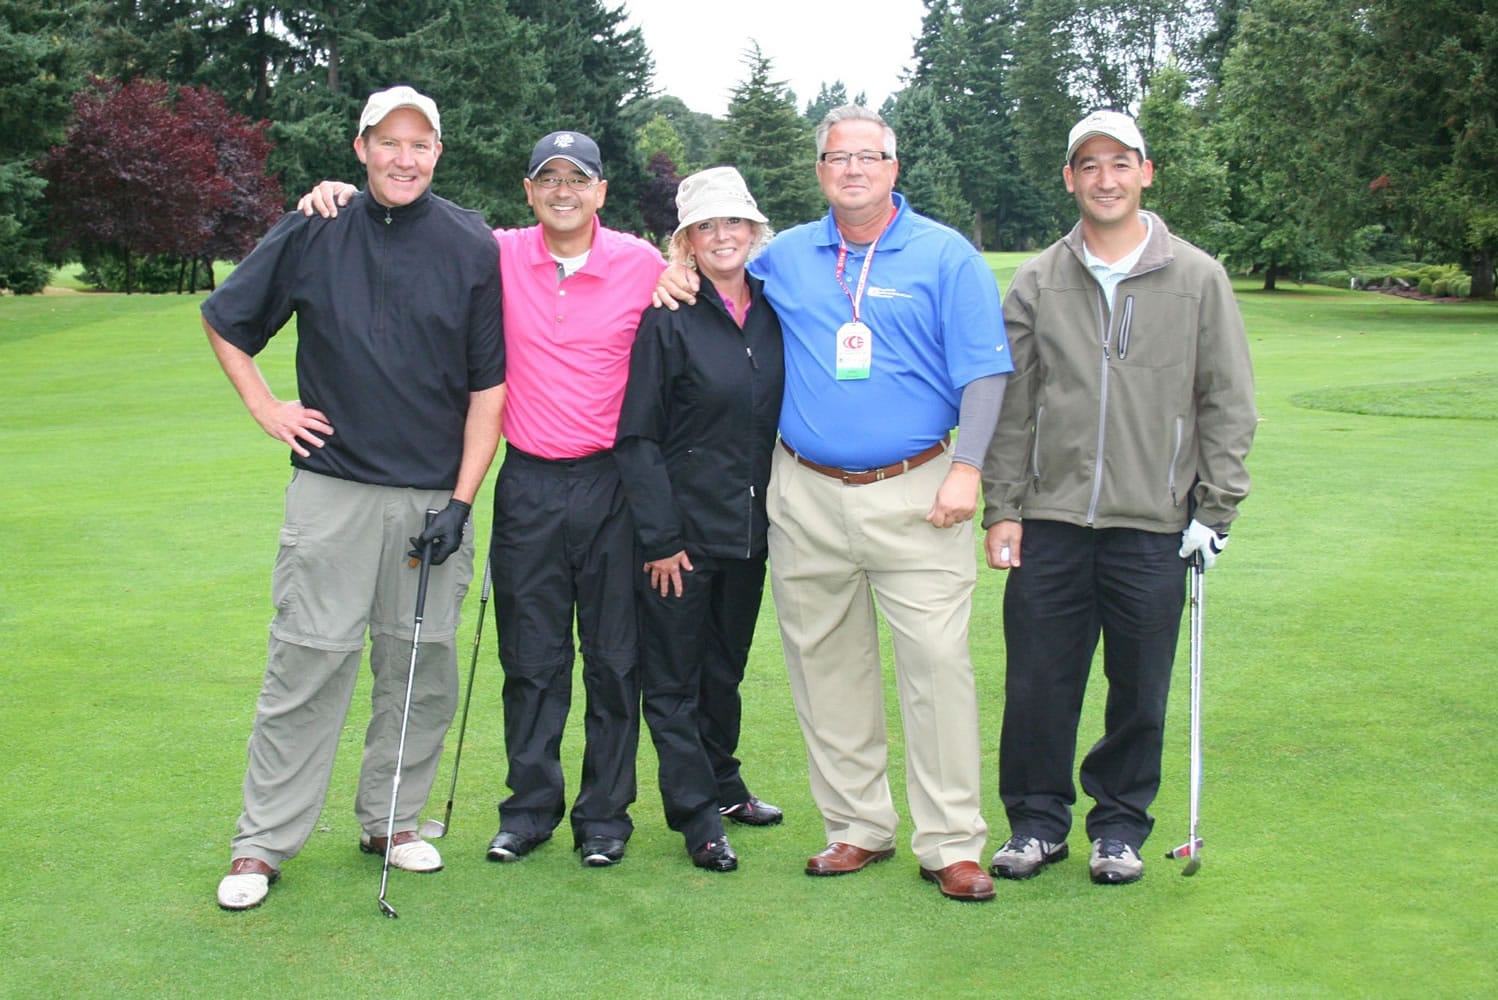 The Emerick Construction Team joins with host Keith Knight of Cherry City Electric at the Third Annual Charity Golf Tournament.